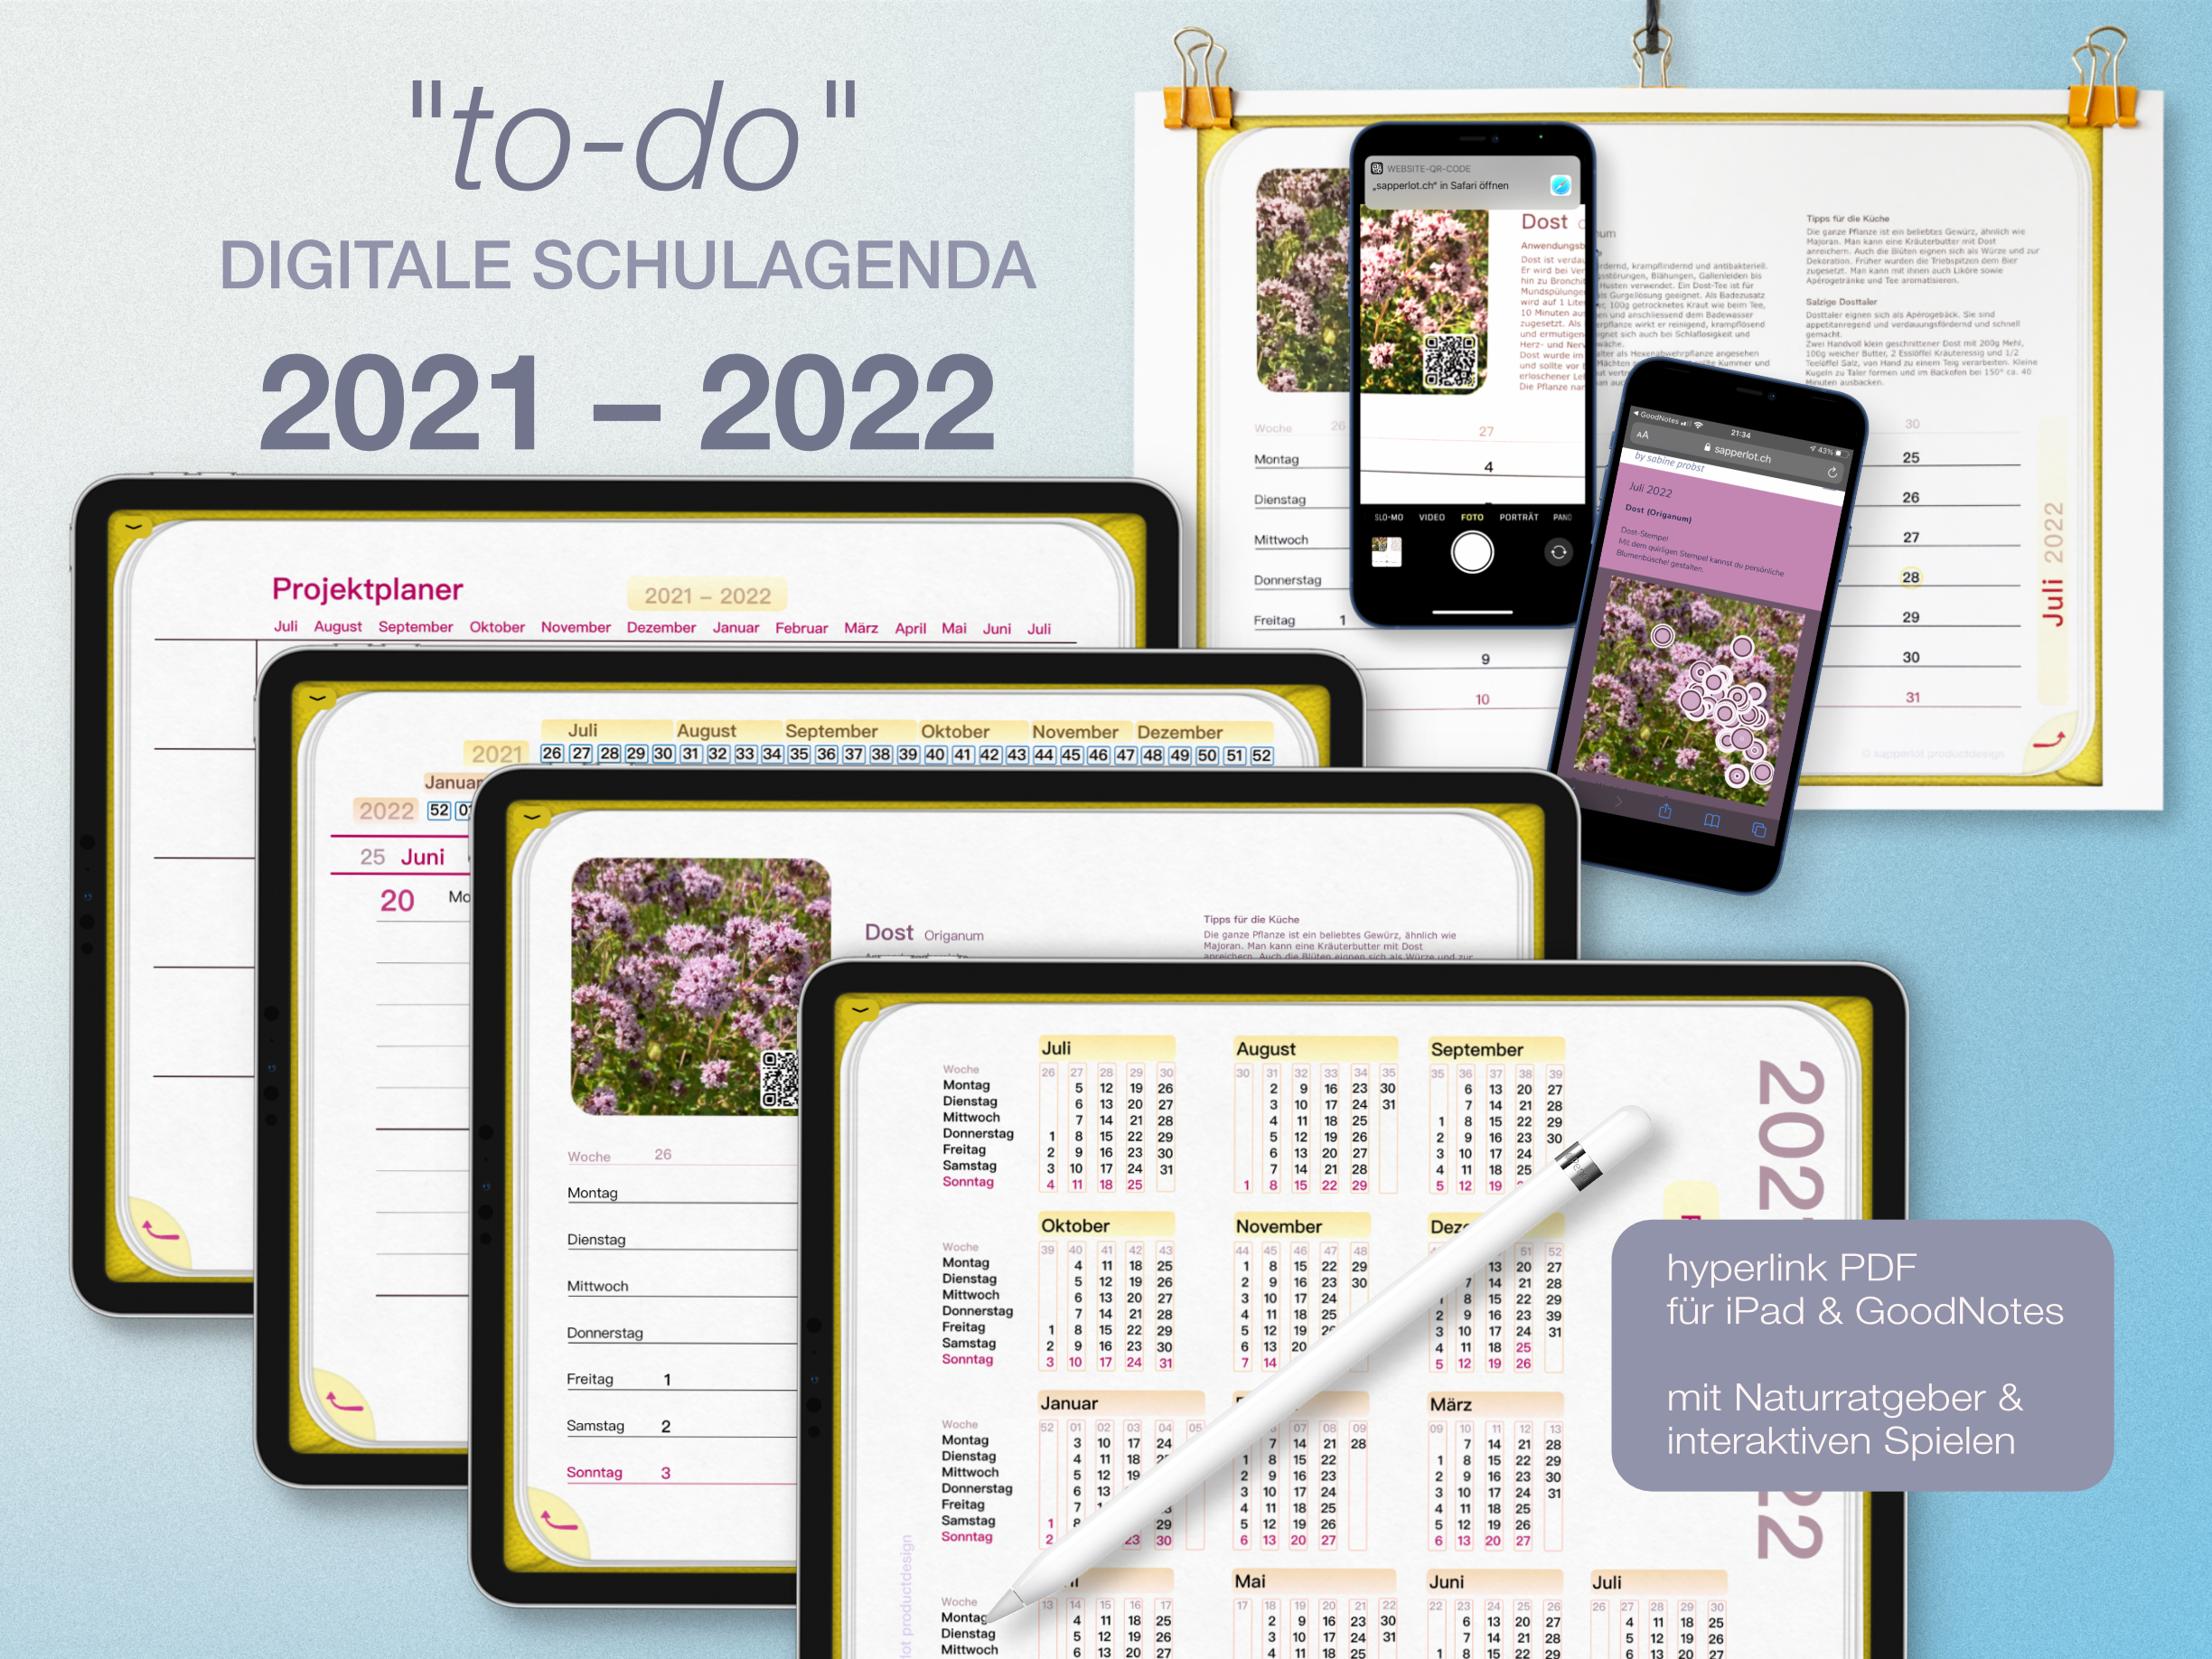 to-do 2021-2022